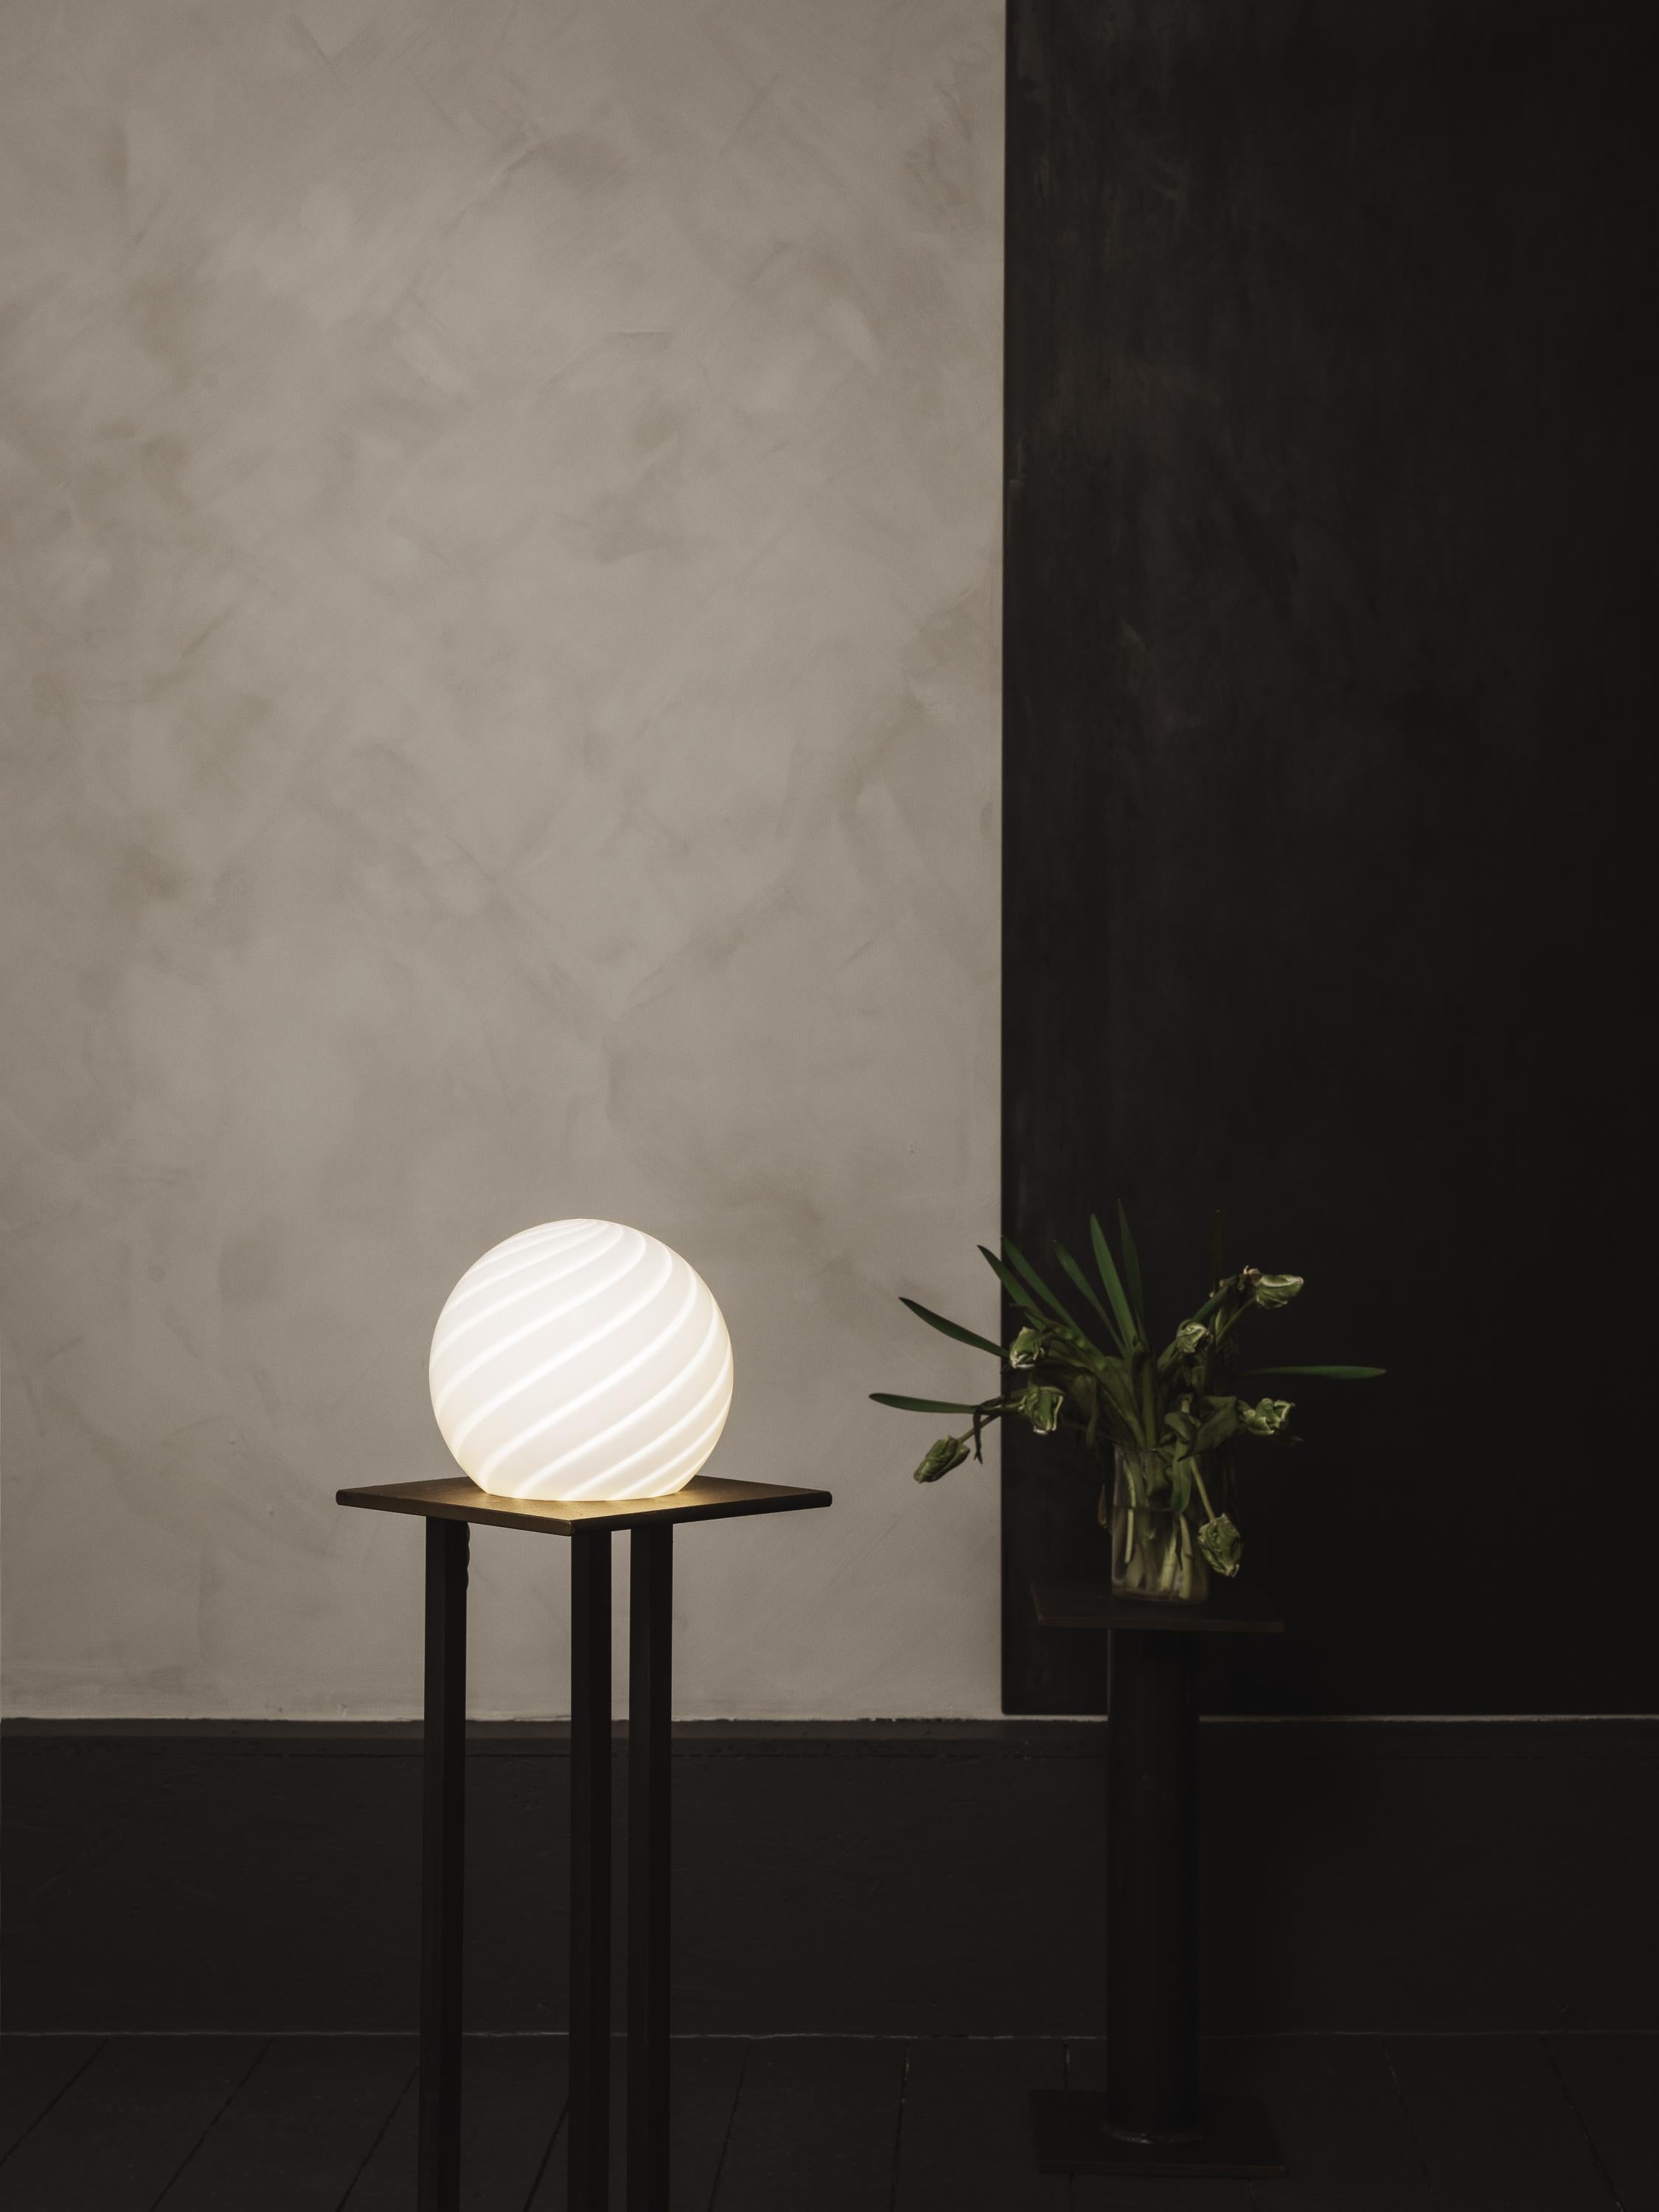 Sphere-shaped table lamp crafted from mouth-blown opaline glass. The design
features a swirl pattern obtained using an original 1970s mould, specifically picked to give the lamp a clean expression. The piece includes hand-casted brass